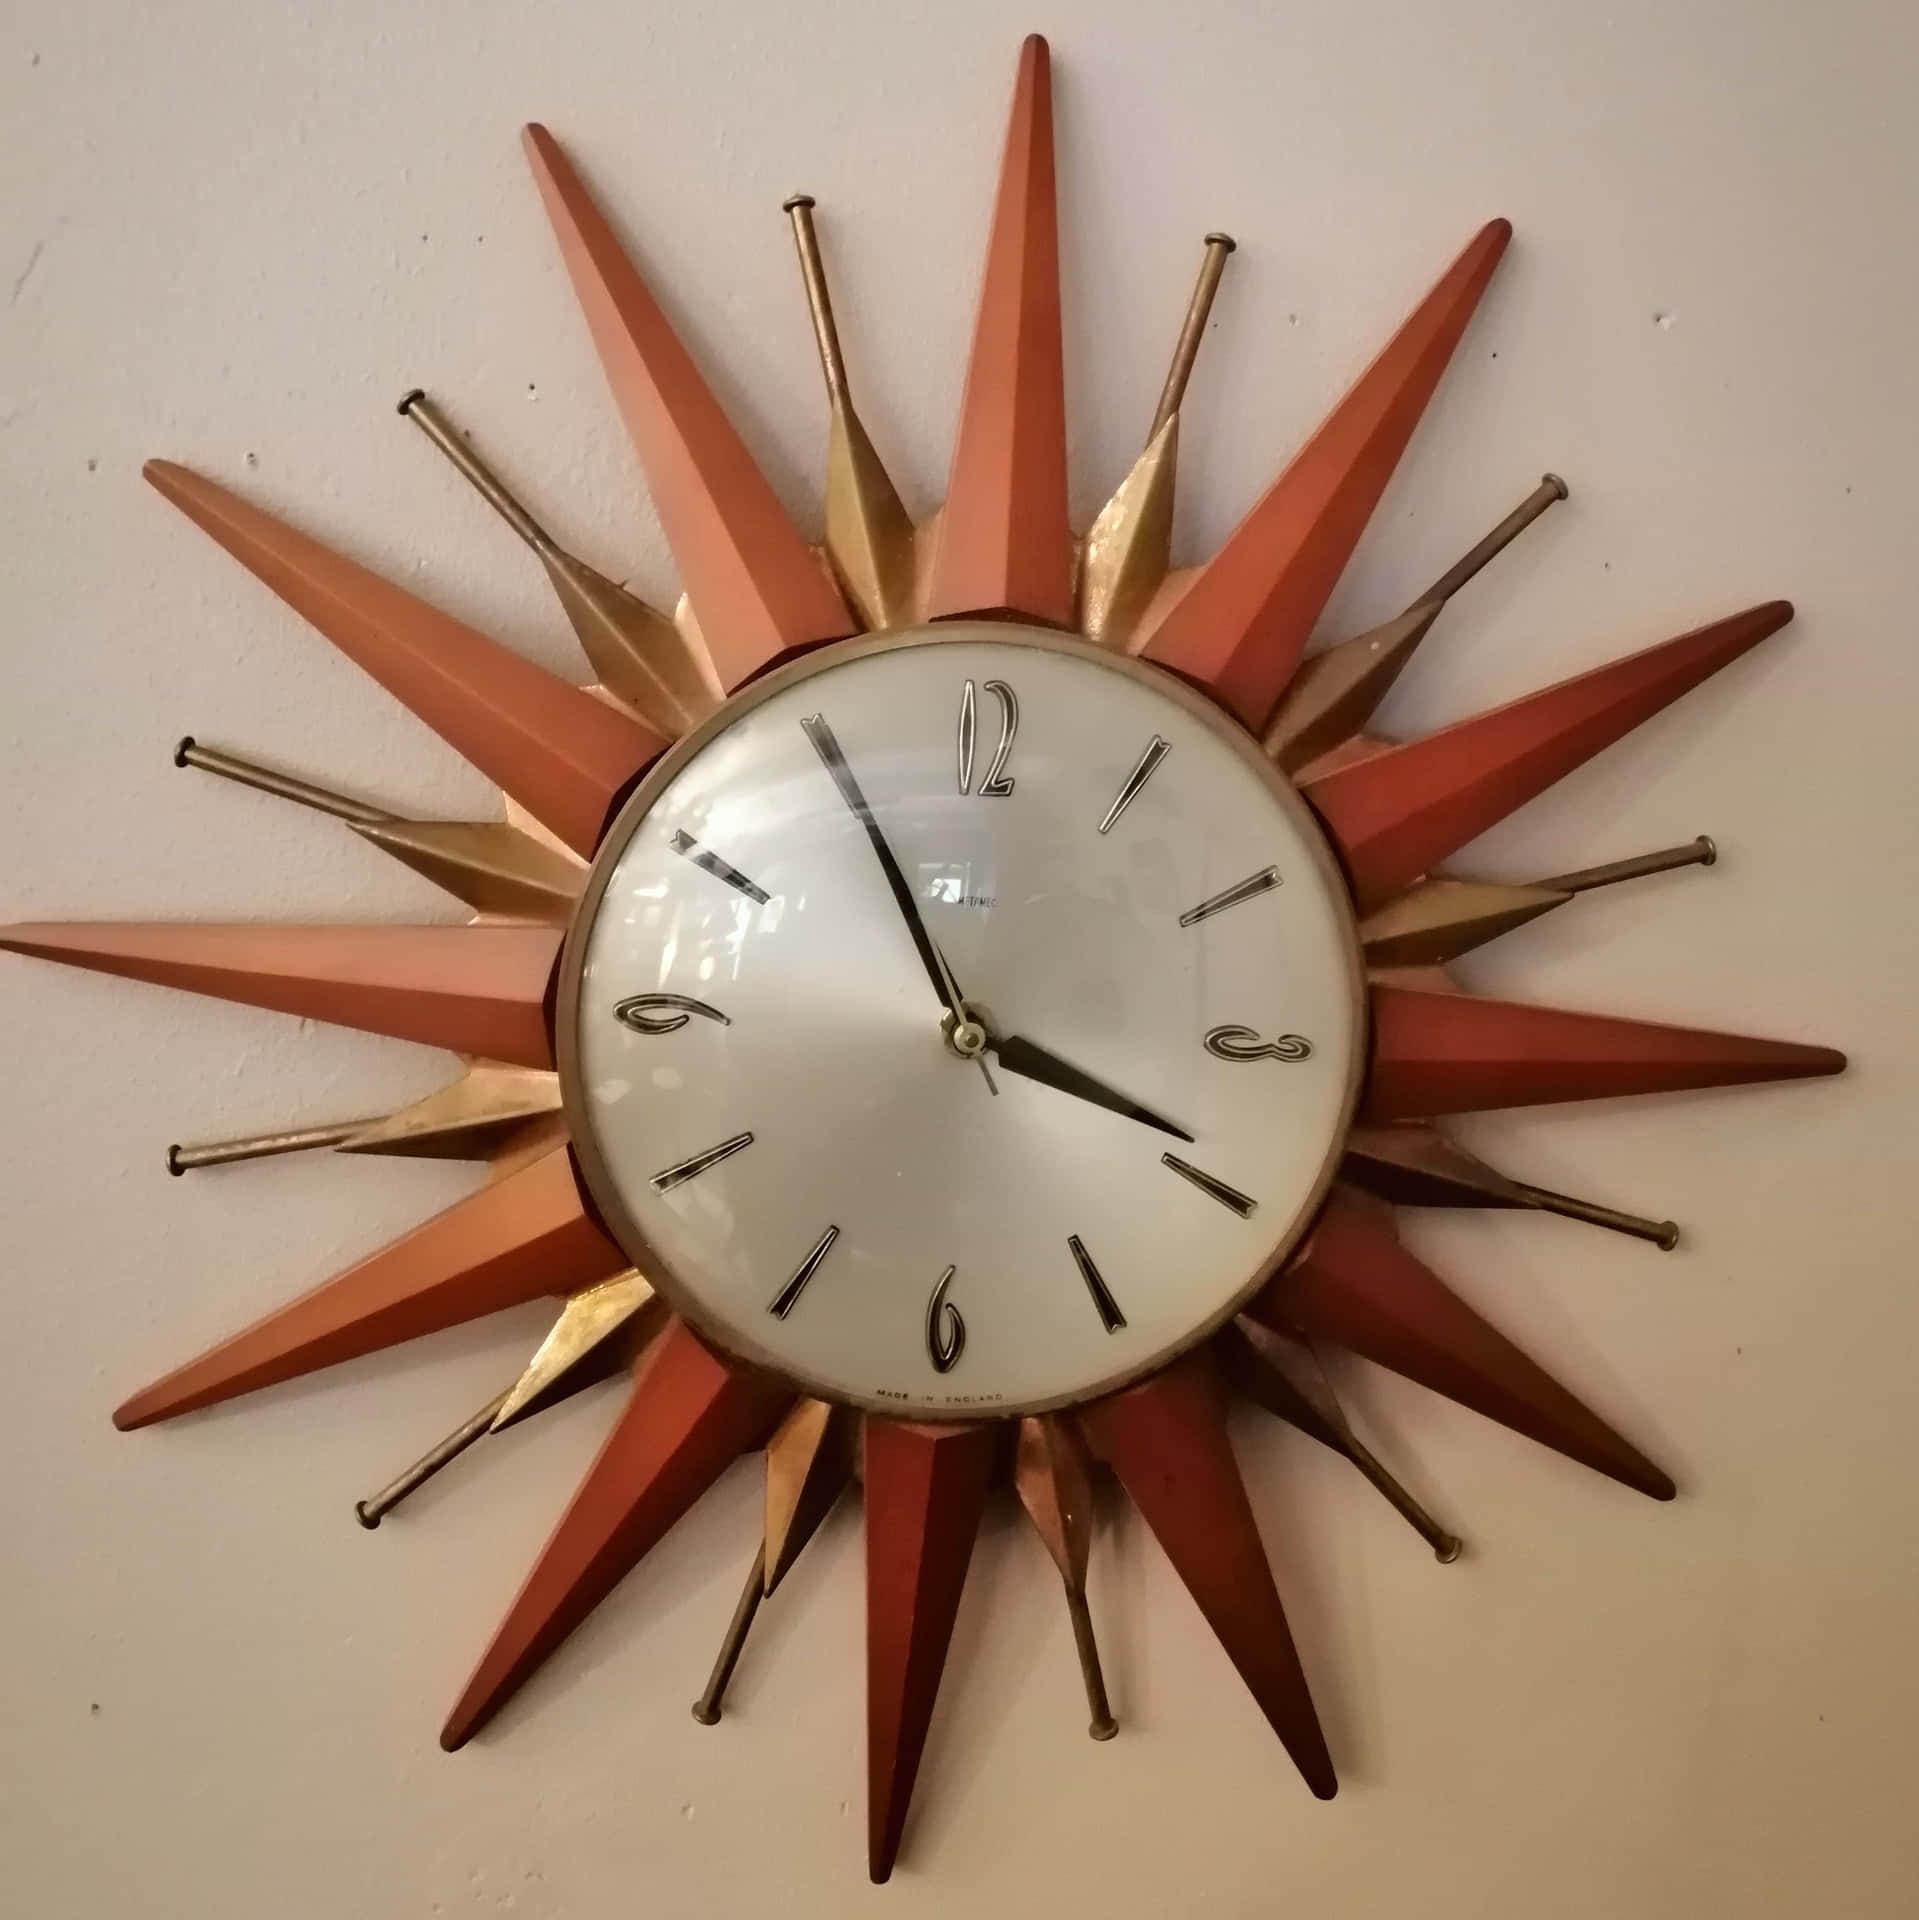 Keeping Time: Referencing the Tradition of Wall Clocks